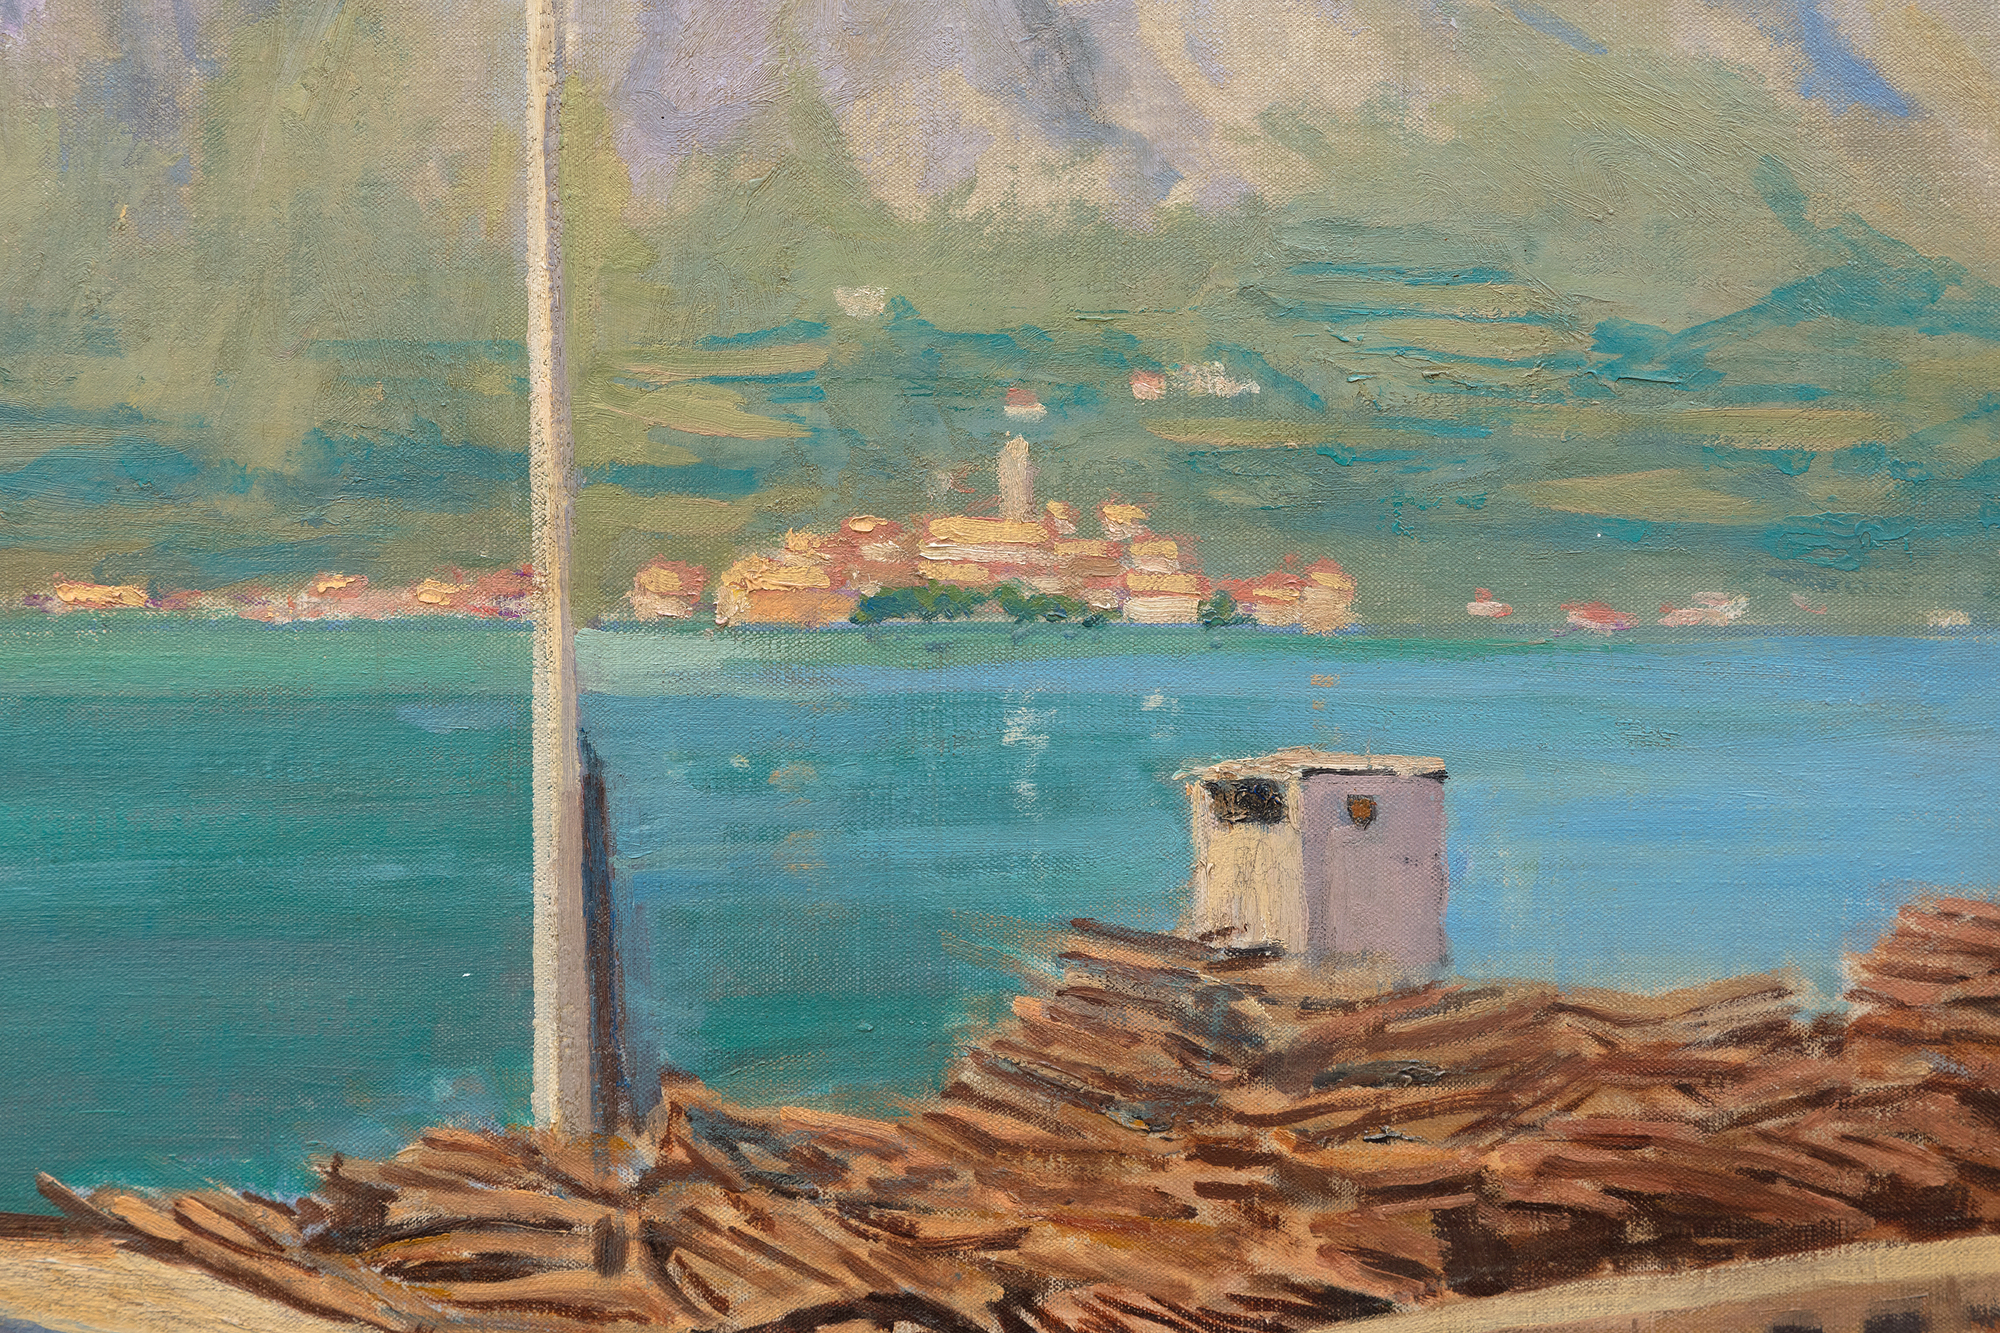 In 1945, with the war ended and Churchill having suffered a surprising defeat in the general election, he accepted an invitation from Field Marshall Sir Harold Alexander to join him at his Italian villa on the shore of Lake Como. Churchill enjoyed his host's generous hospitality and focused his attention and energy on capturing the region on canvas. He produced fifteen paintings, which embody how painting absorbed his attention and offered an elixir that helped him recharge. This iconic painting was featured in a January 1946 article in LIFE, and has been selected as a color illustration in multiple editions of Churchill’s book, Paintings as a Pastime.